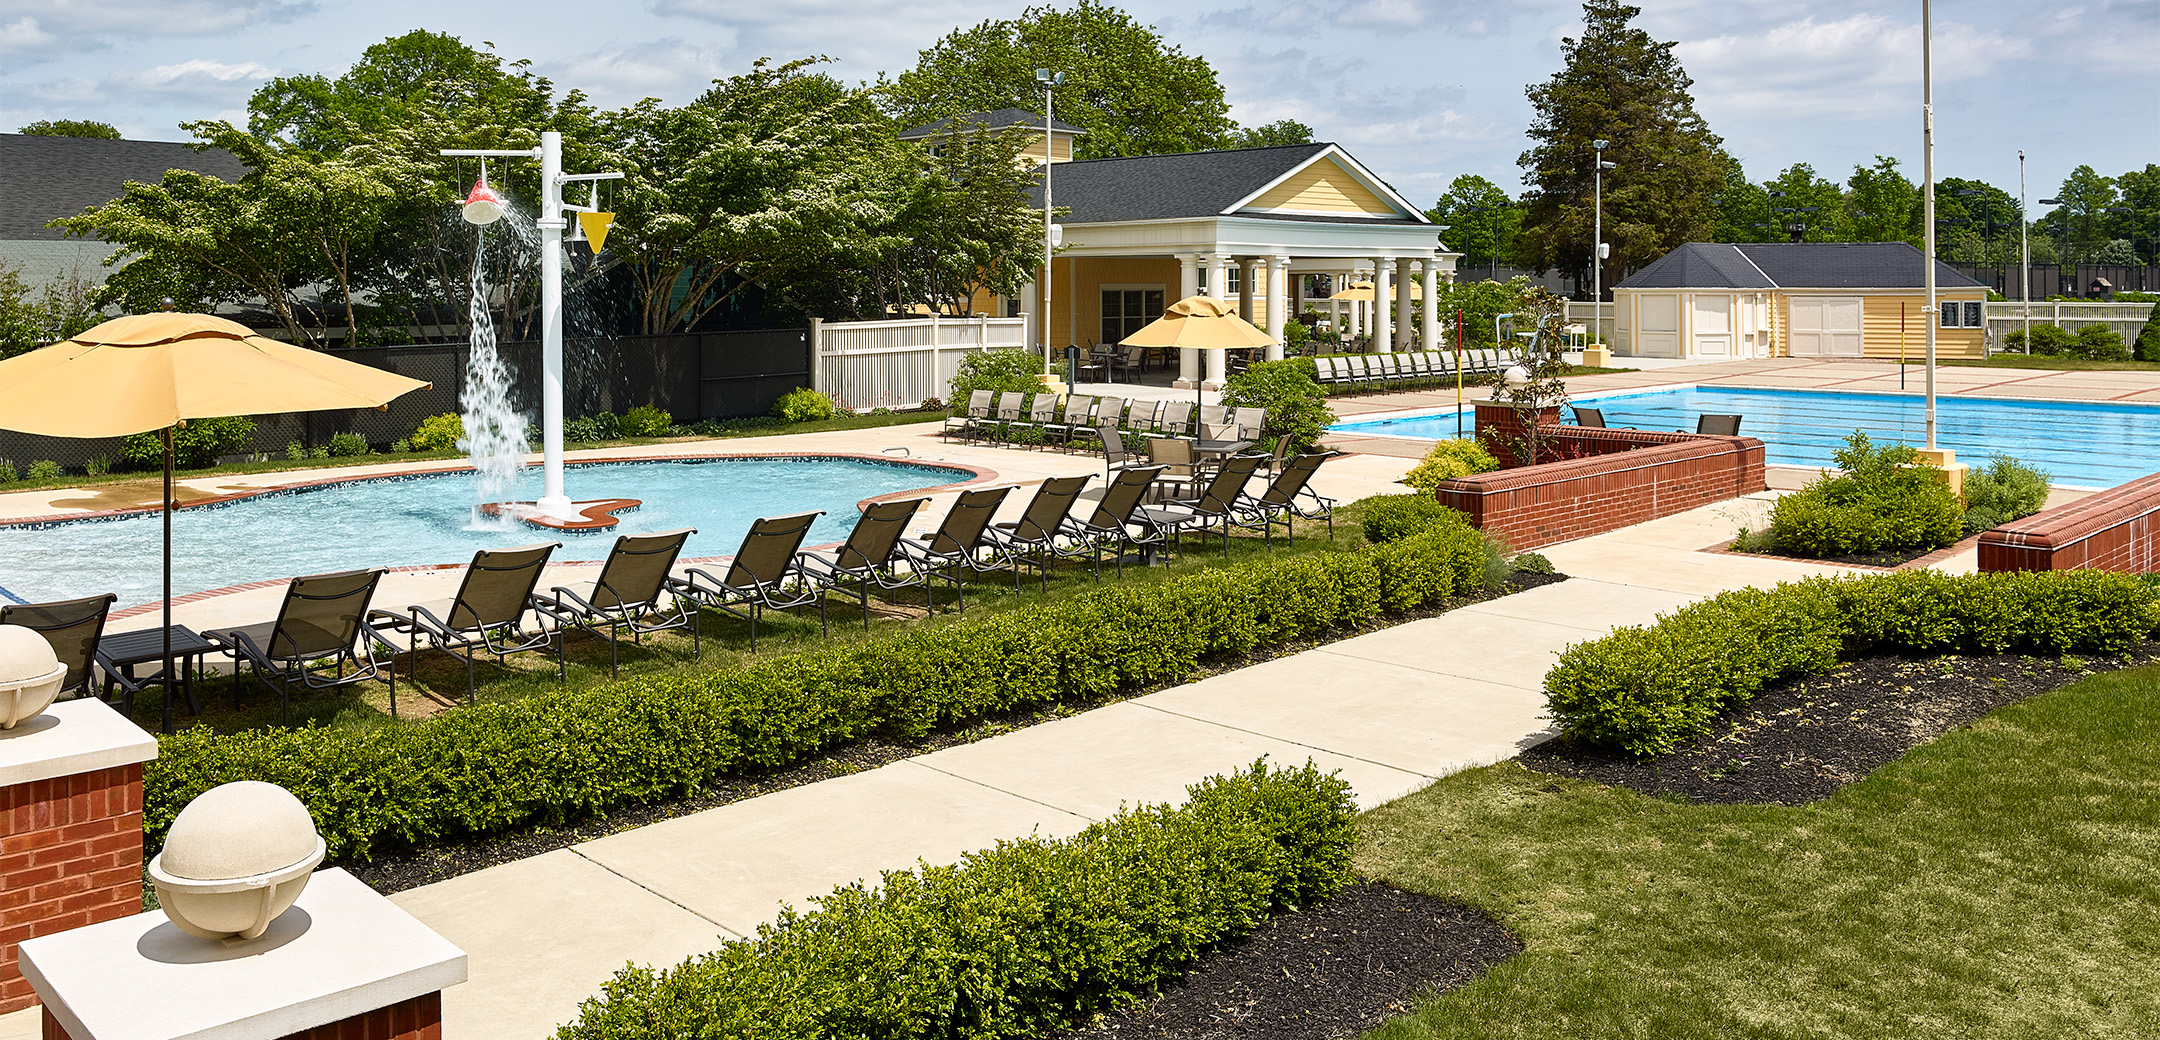 The Philadelphia Cricket Club's outside pool featuring two large separate pools, multiple pool lounge chairs, a pool house in the far right, and the snack bar facility in the back behind the lap pool.